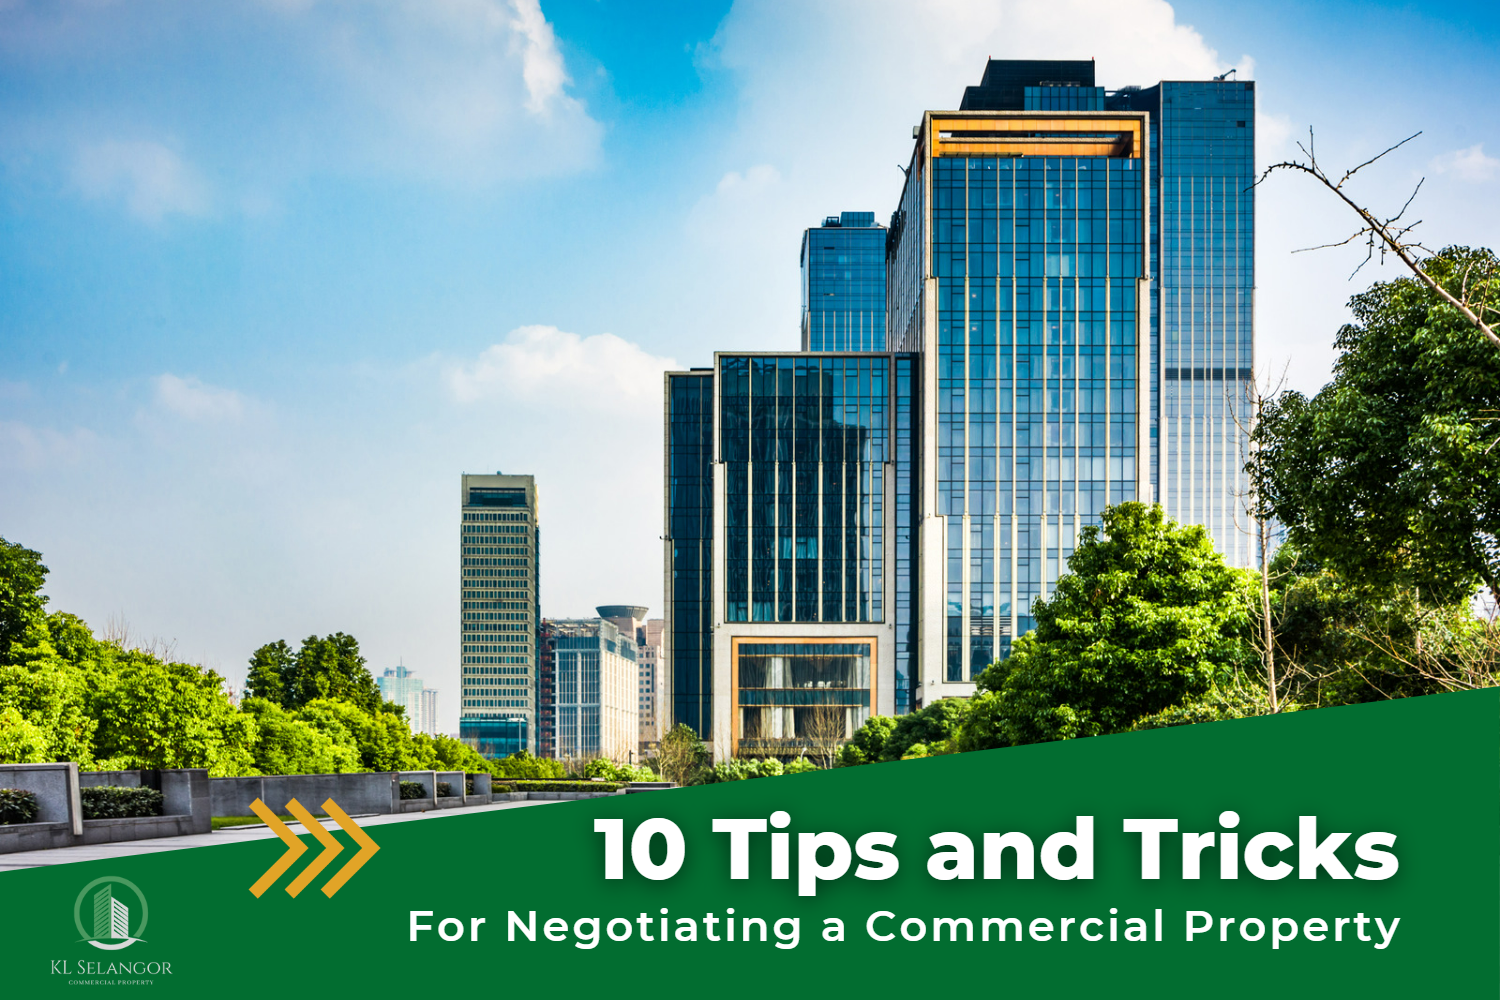 10 Tips and Tricks for Negotiating a Commercial Property